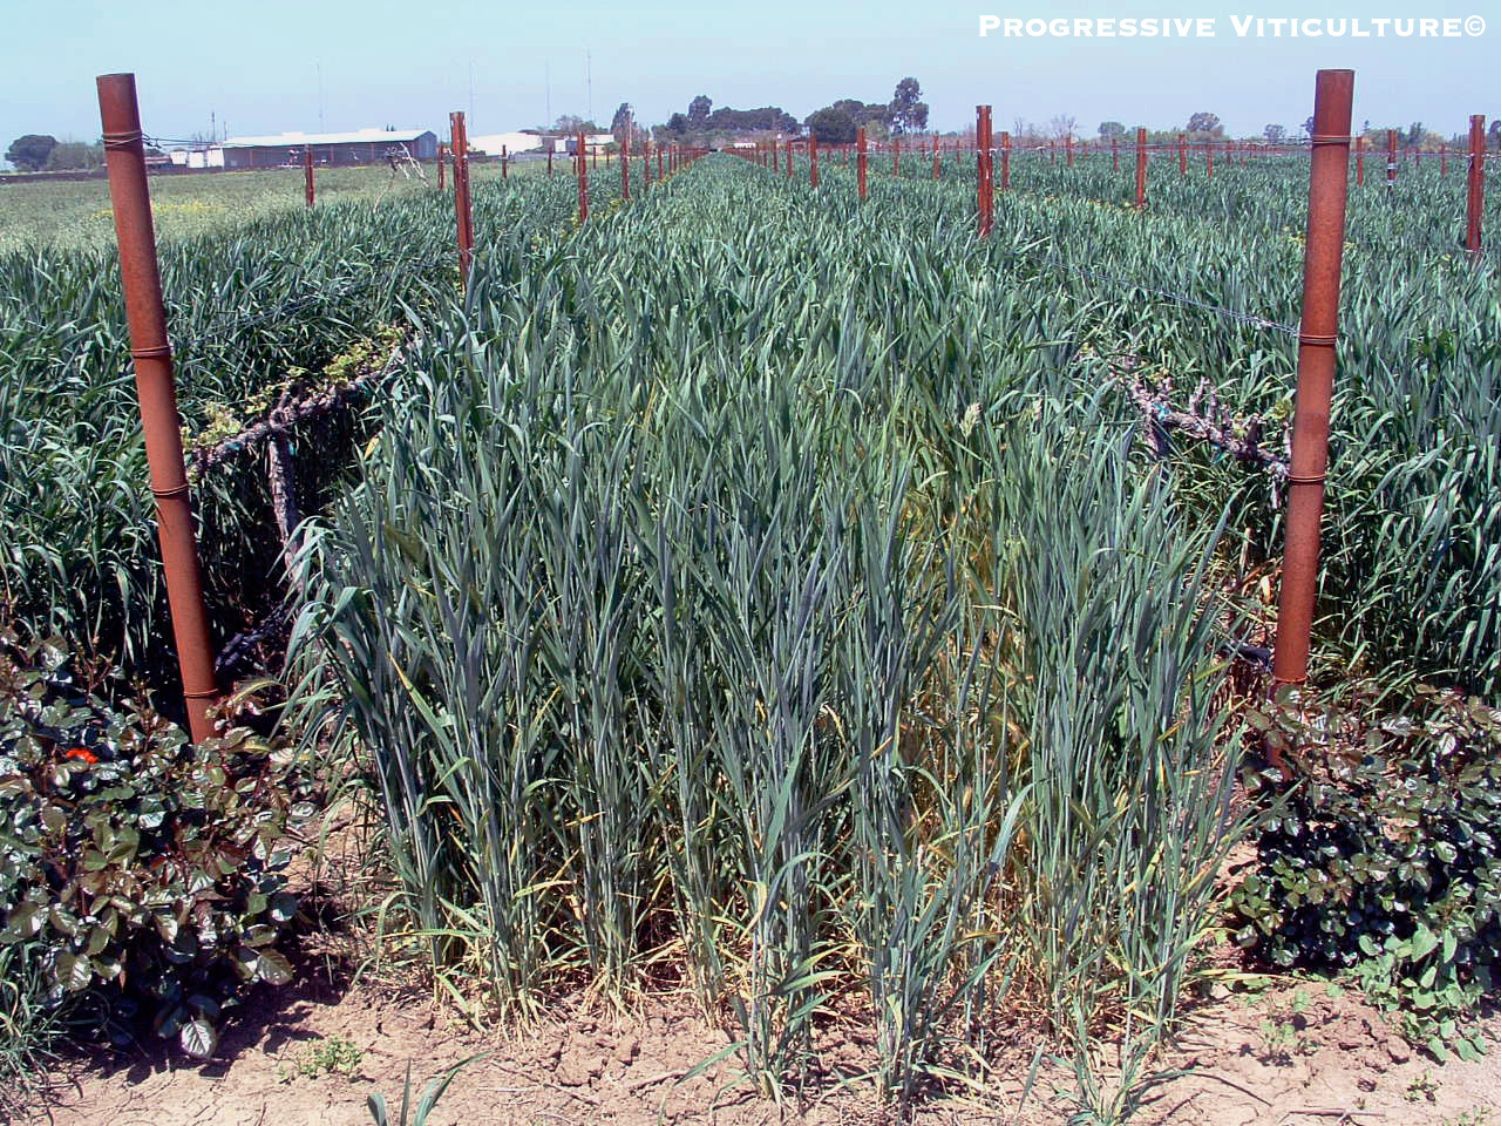 Figure 1.  Vigorous growing cover crops consume soil water and mineral nutrients, decreasing the quantities available to adjacent grapevines. (Progressive Viticulture©)